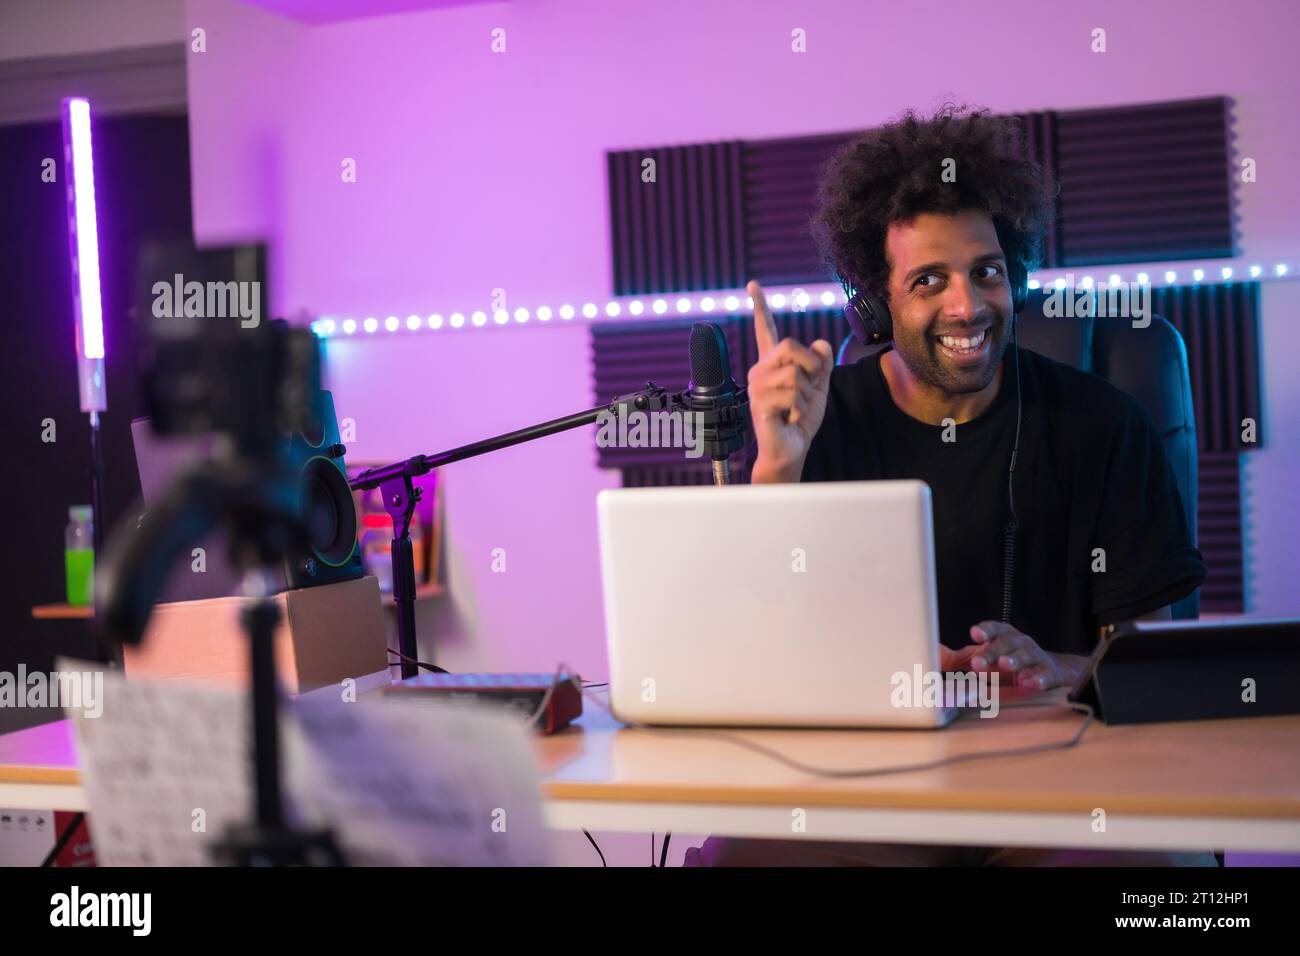 Cheerful and cool streamer recording a video tutorial in a music production studio with neon lights Stock Photo